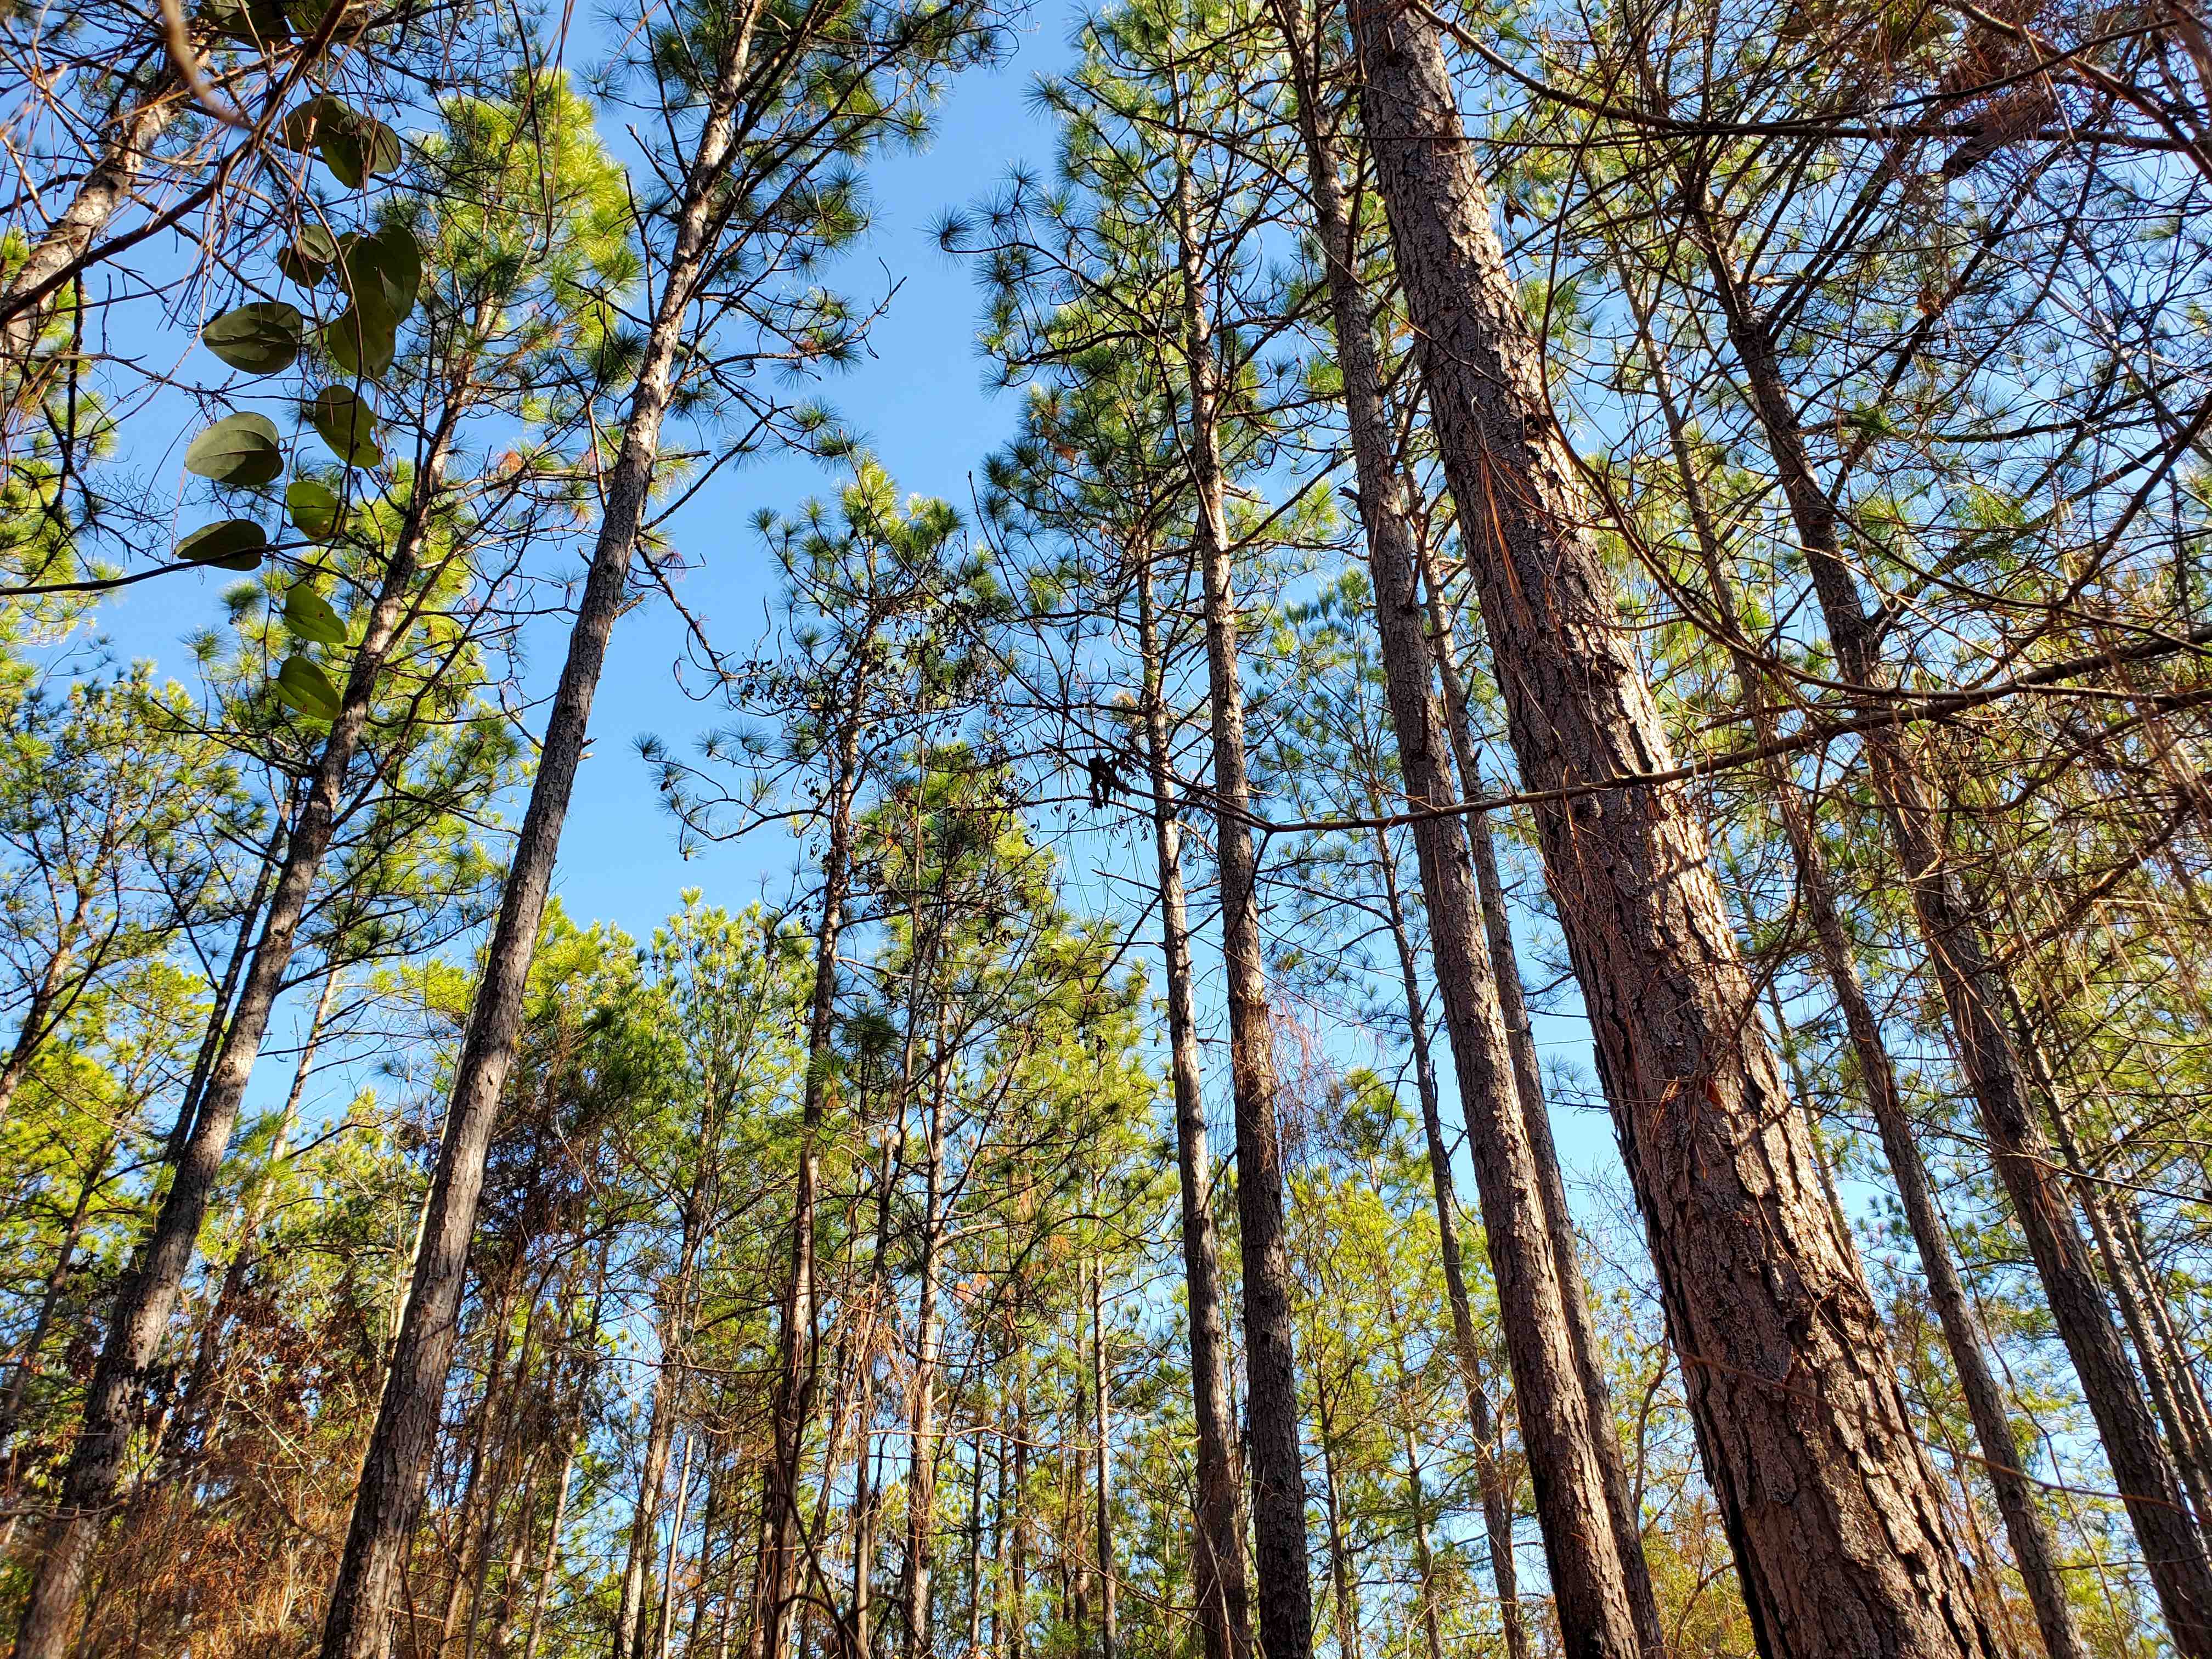 Longleaf pines were planted on 50+ acres over 30 years ago